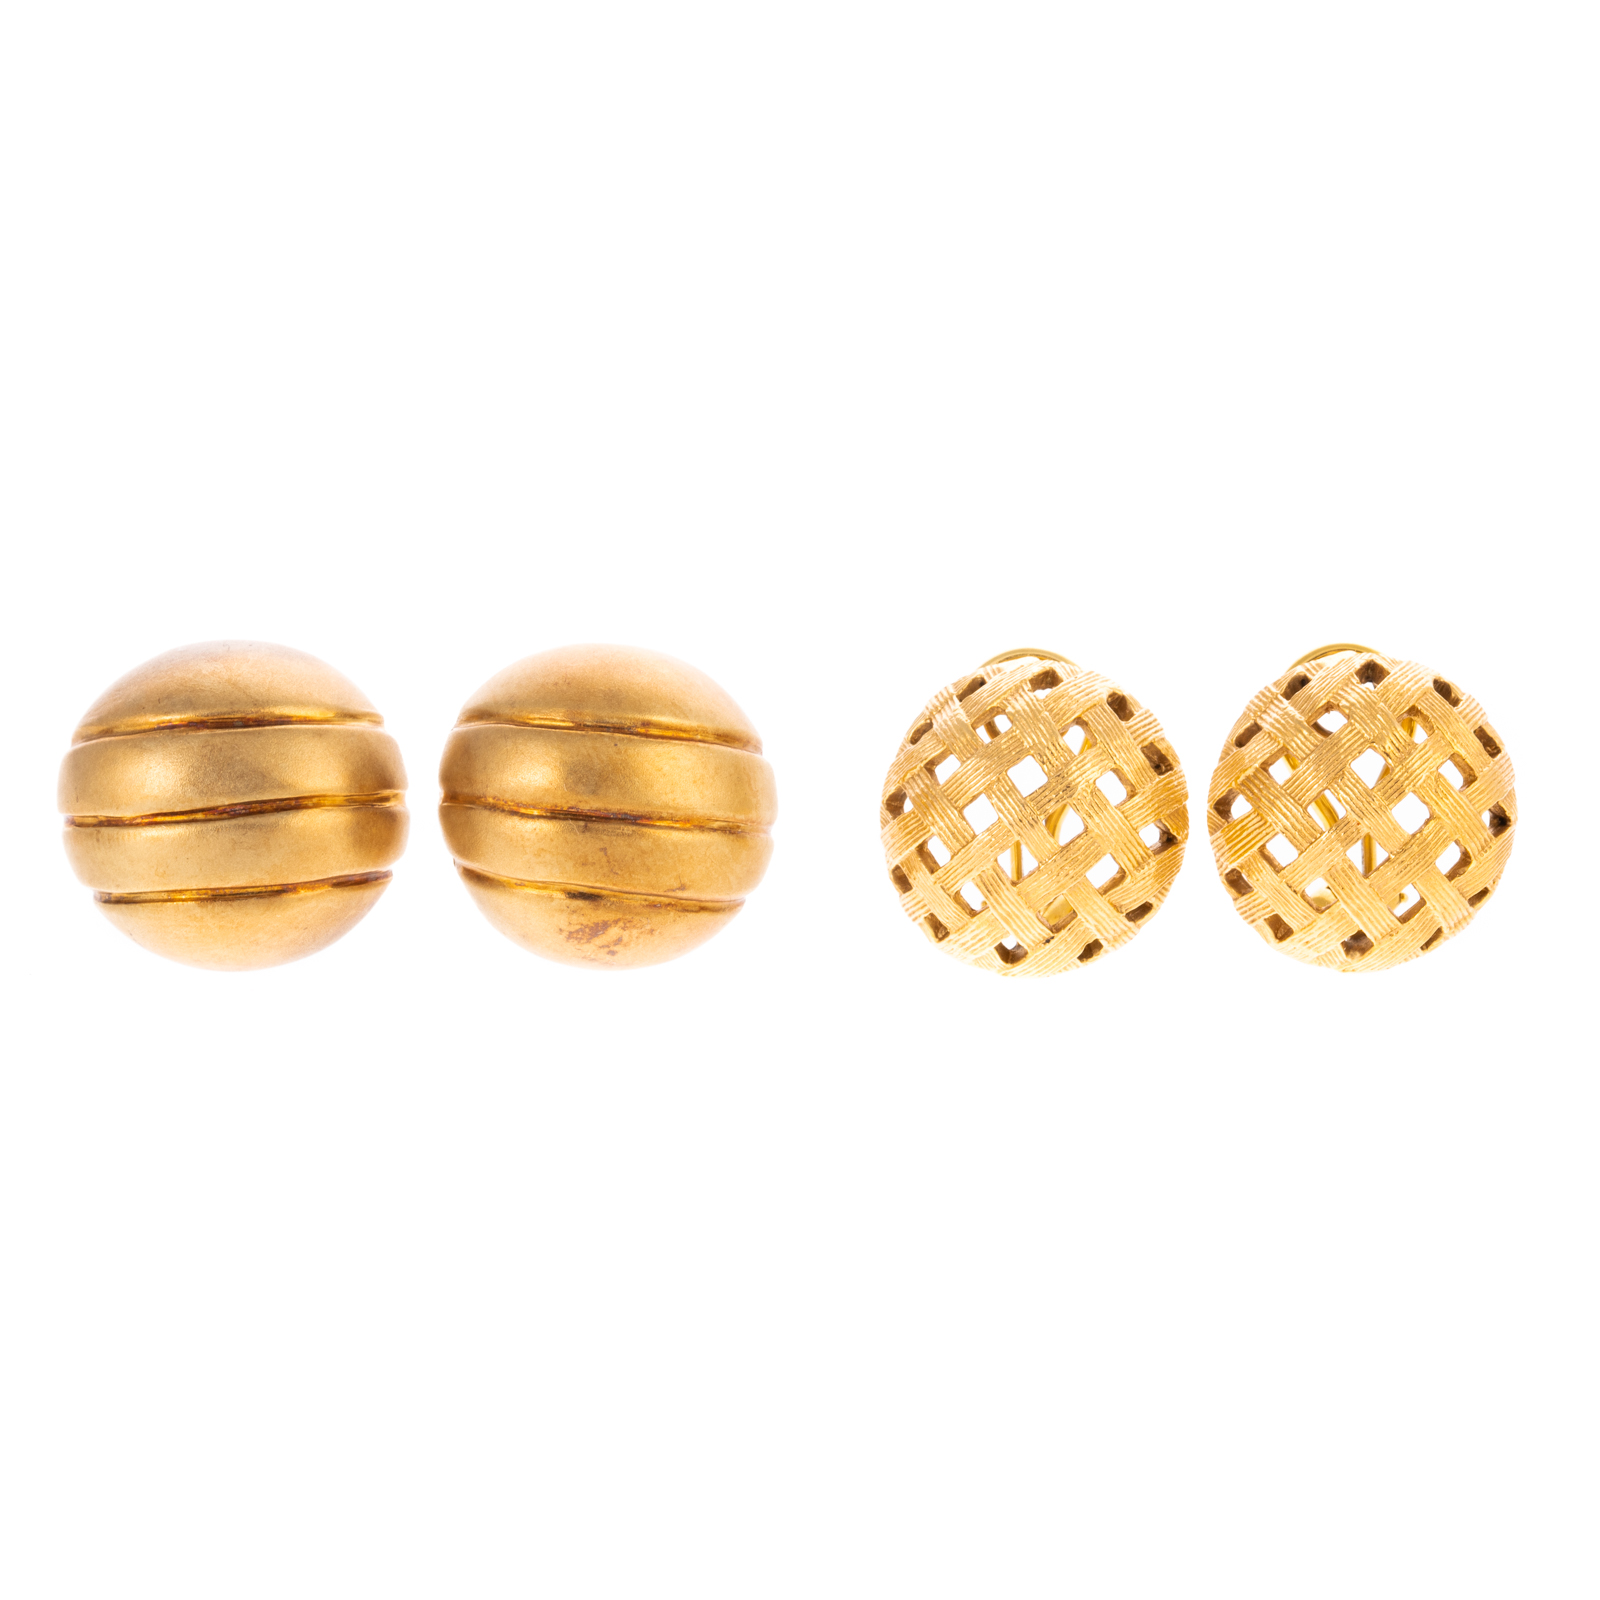 TWO PAIRS OF DOME EARRINGS IN 18K